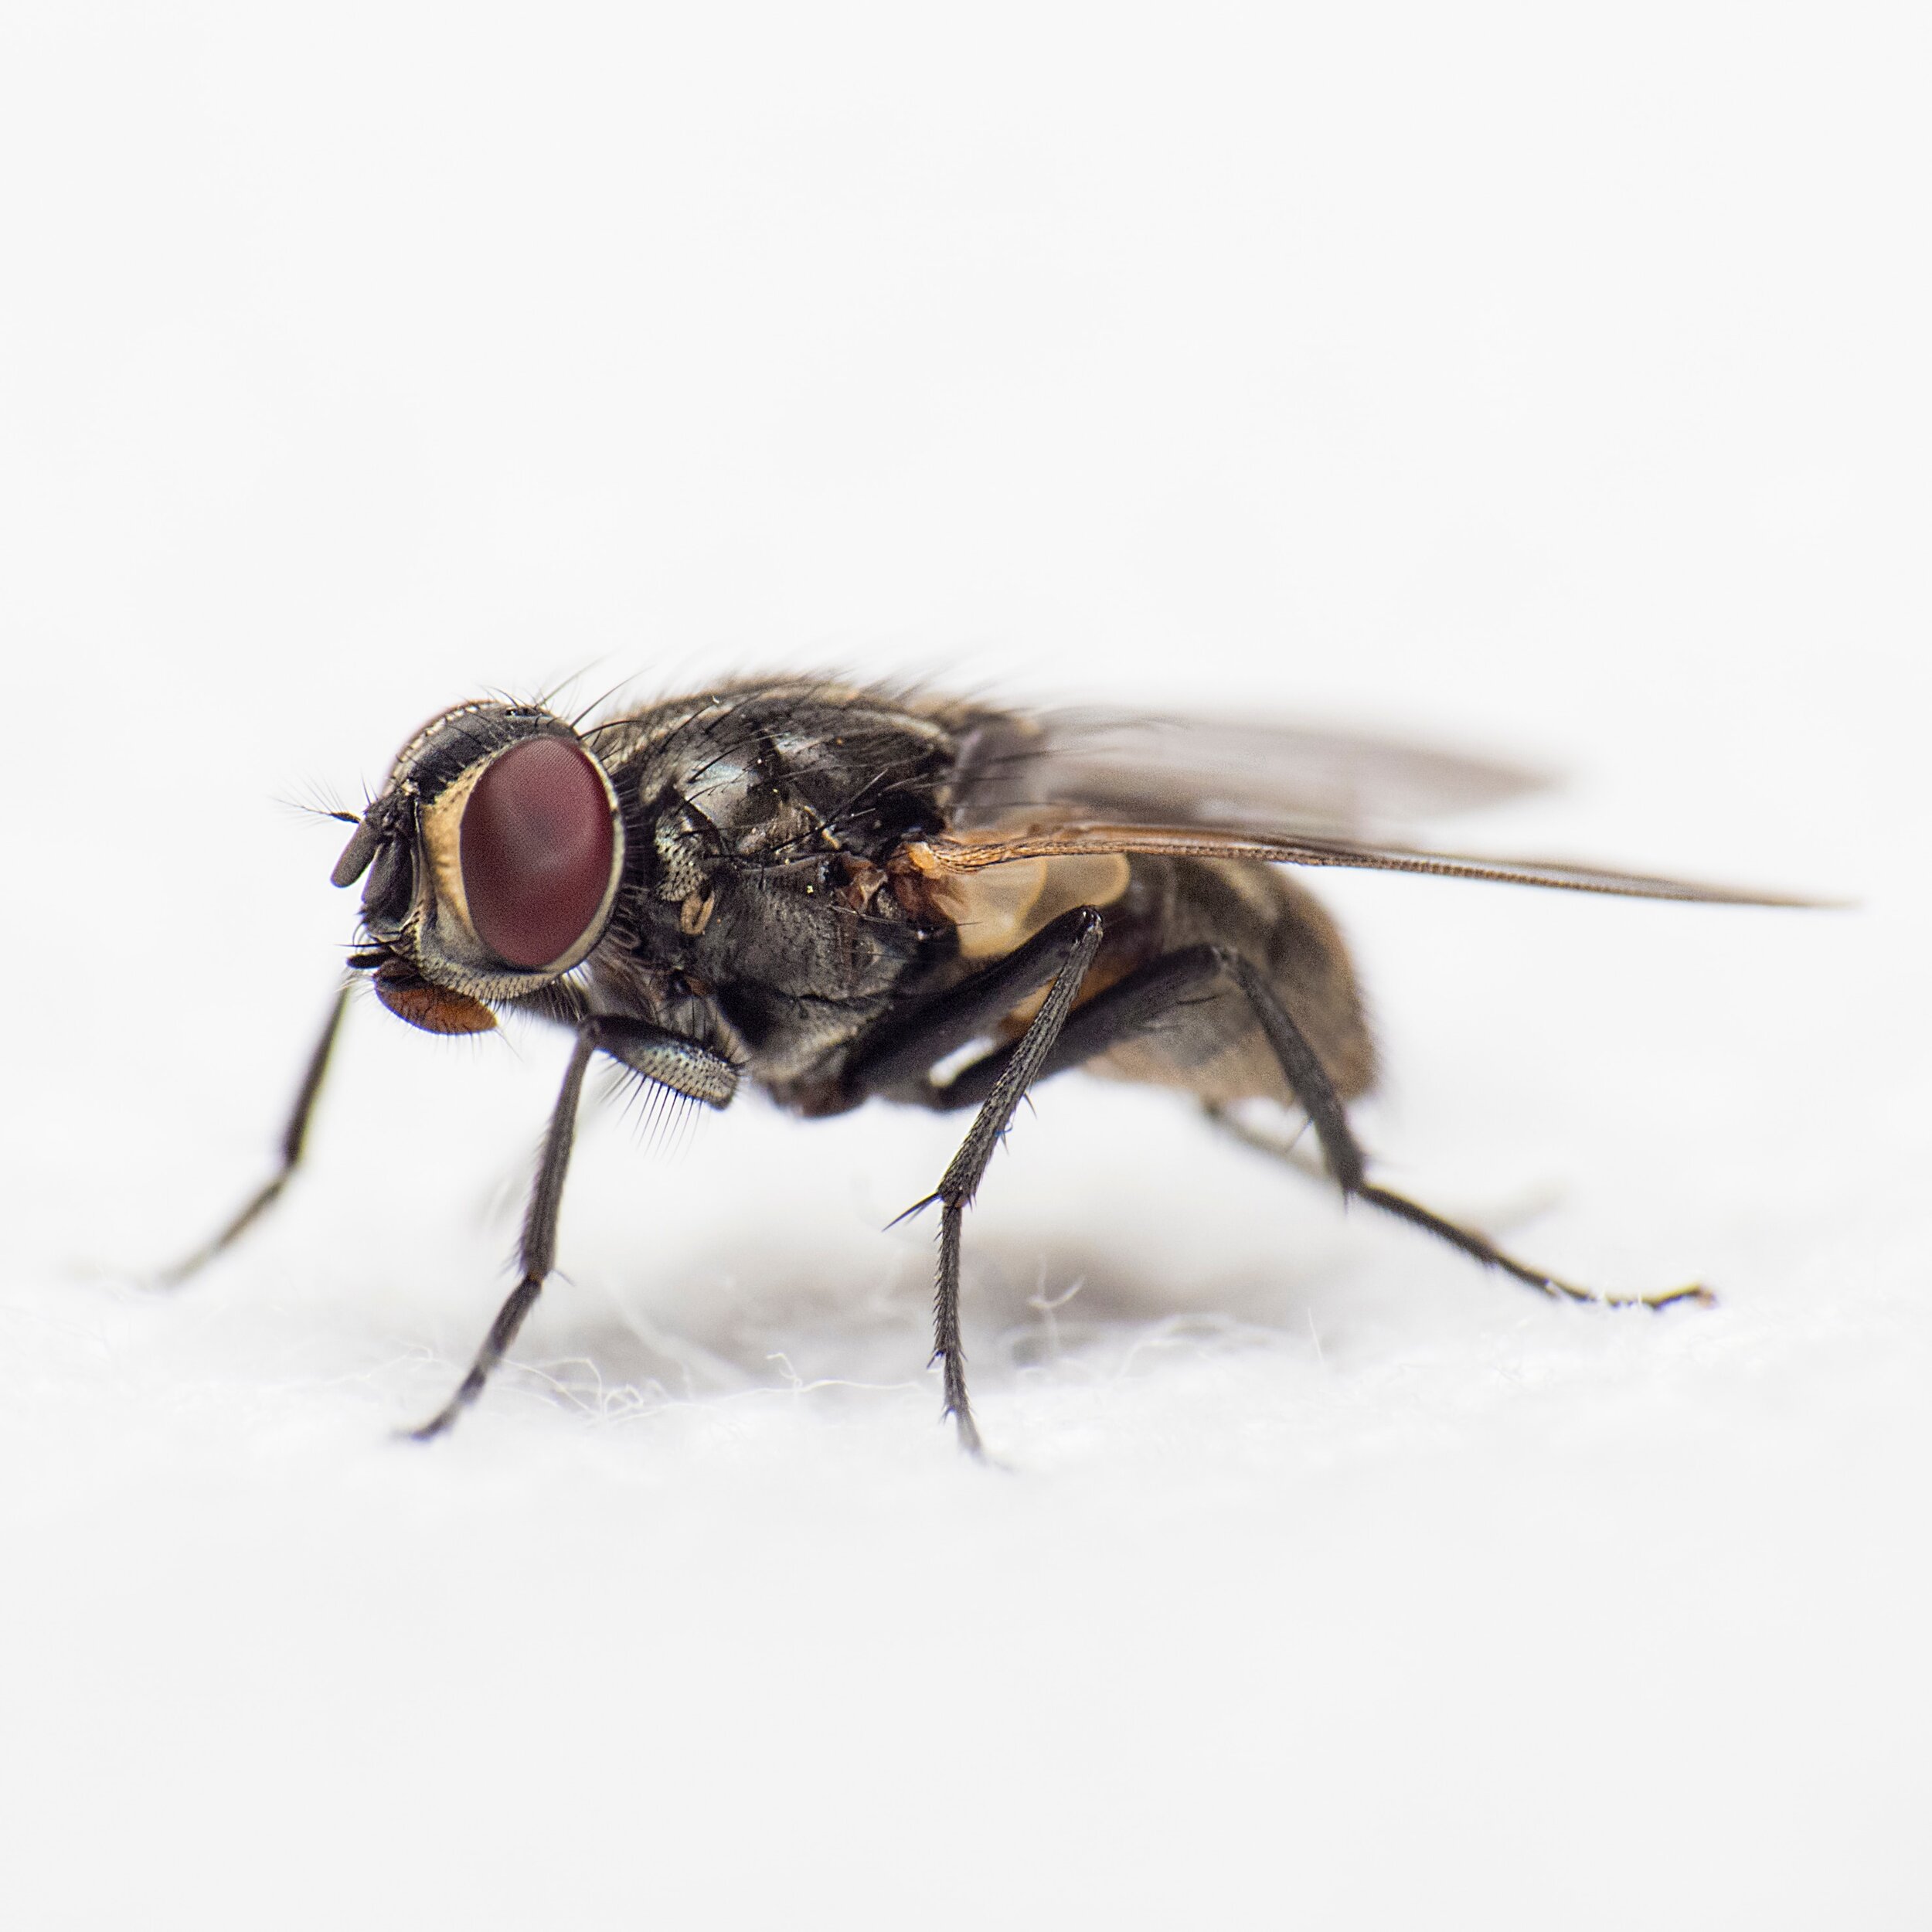  Adult flies subsist on a liquid diet with many common species having mouthparts that are little more than a sponge on a stick. If their food isn't liquid, no worries; they simply throw up on it and wait for their digestive enzymes to break it down. 